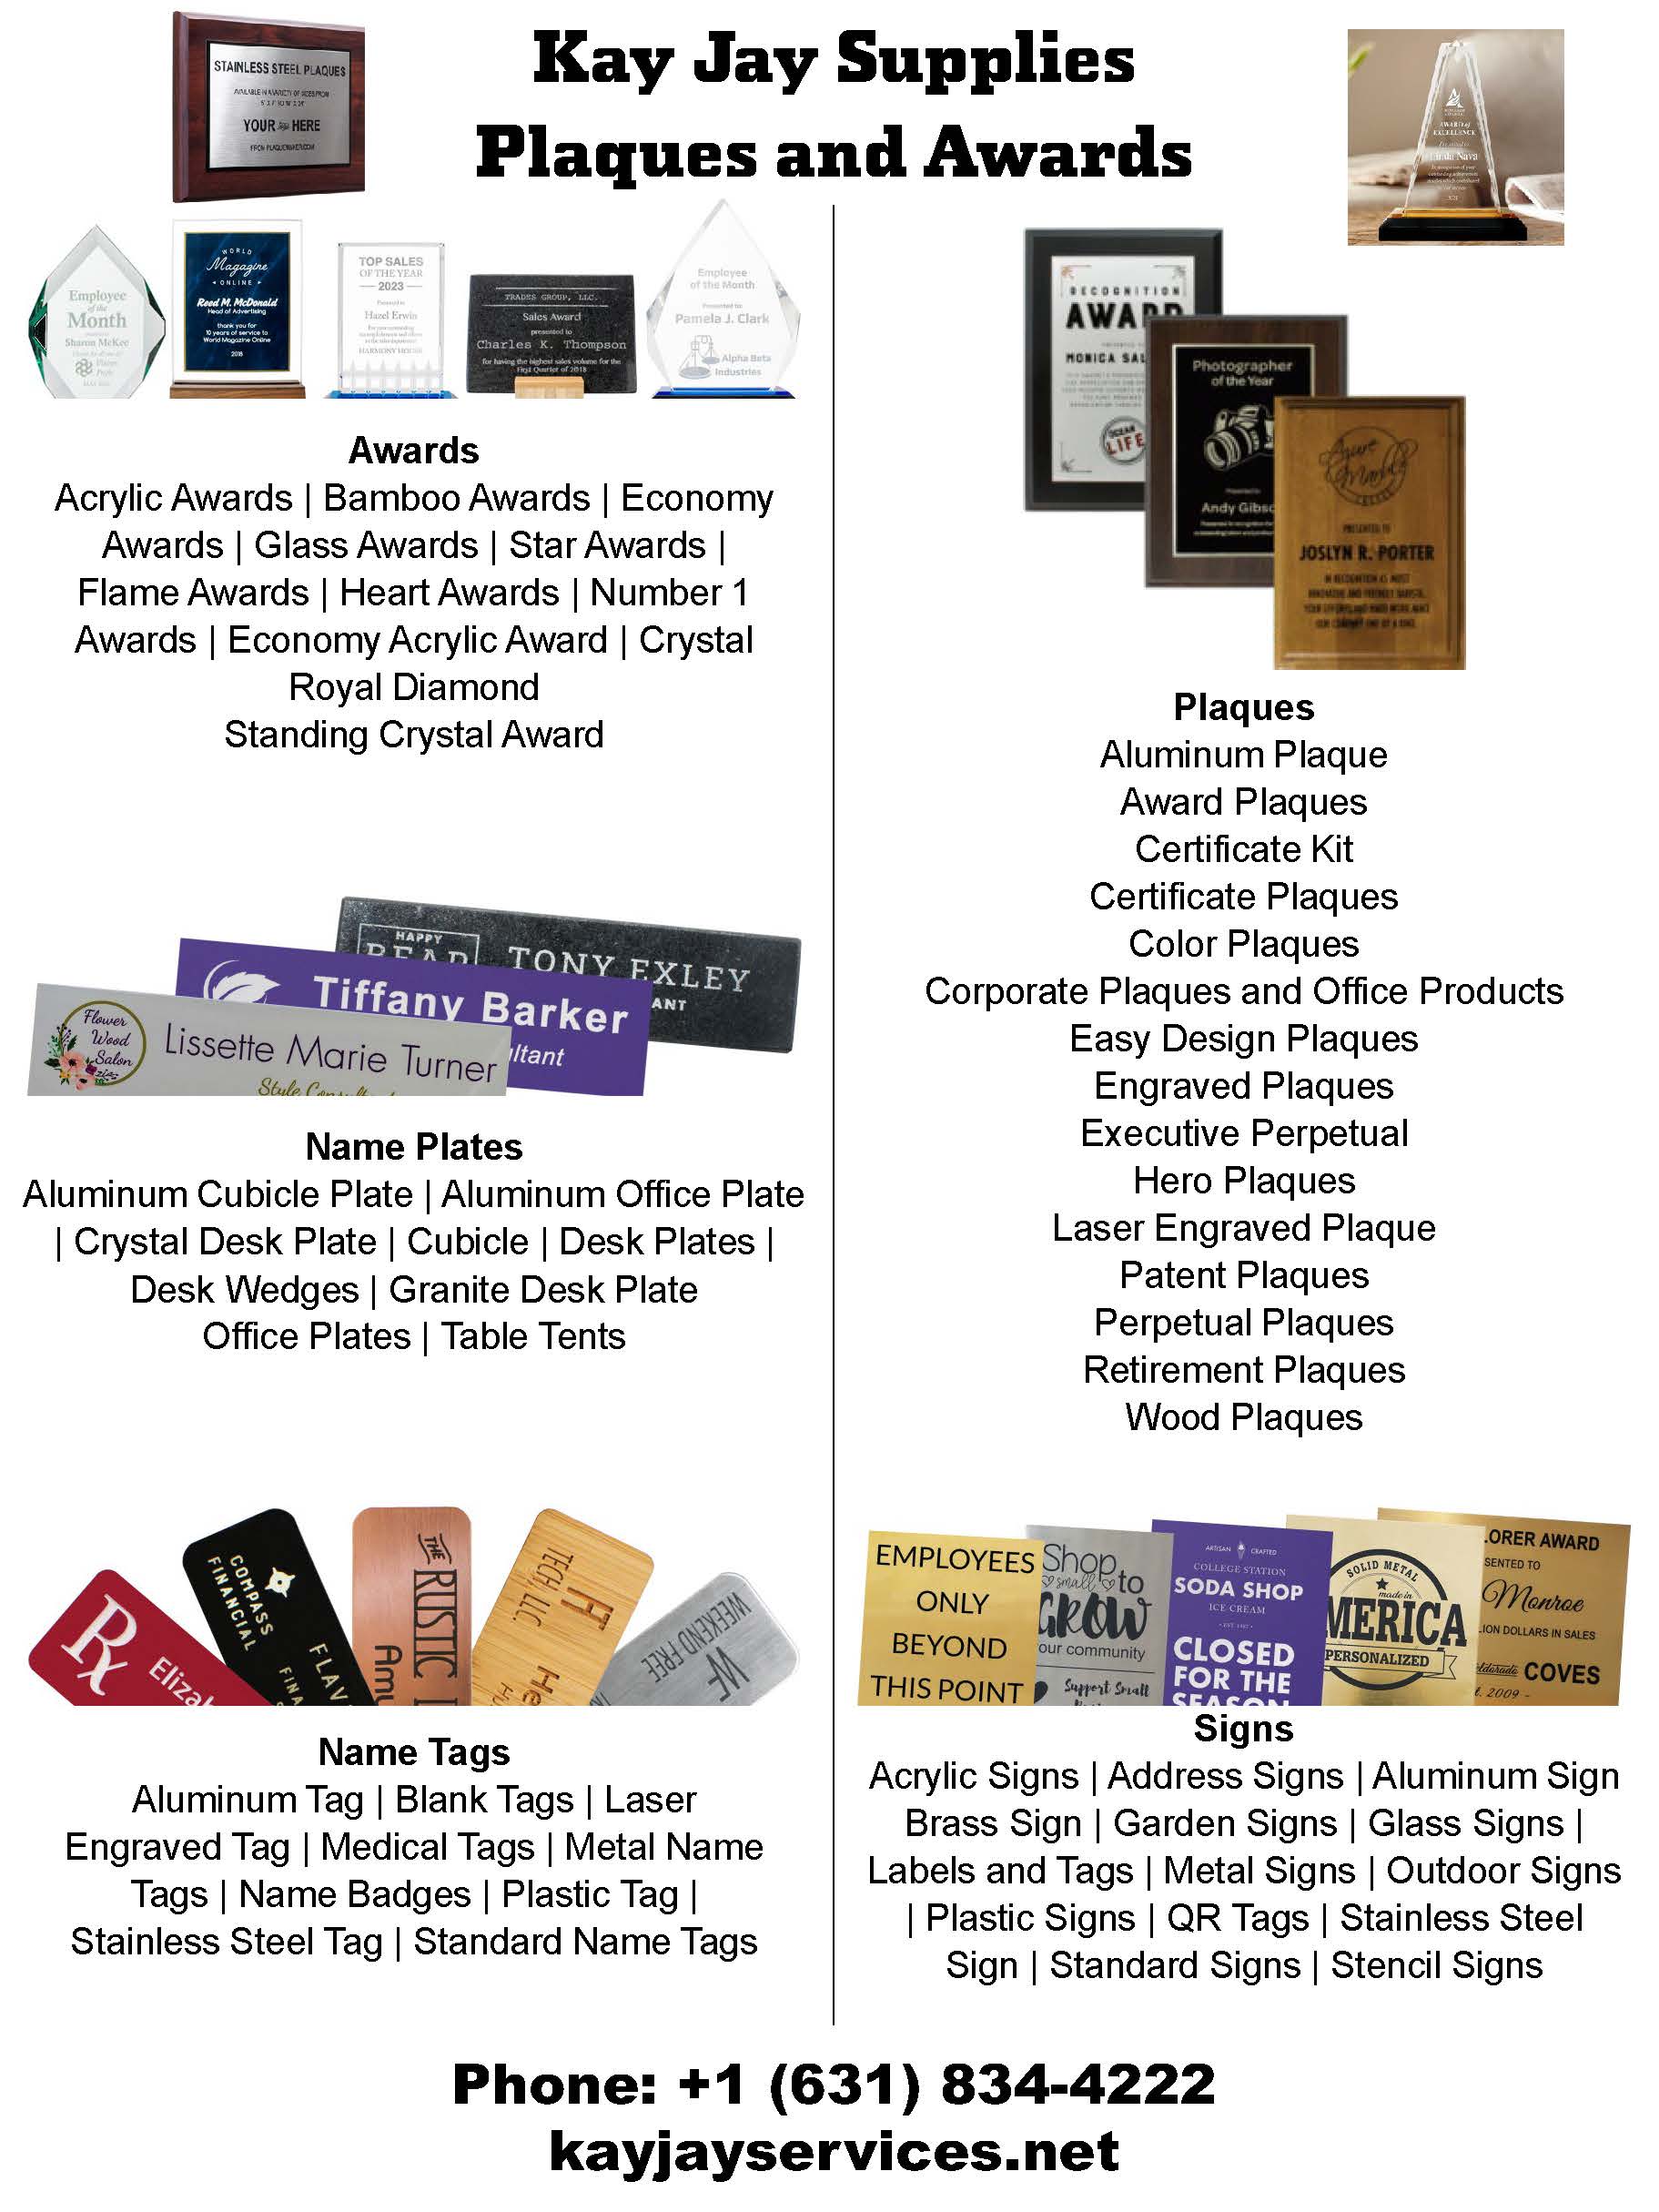 Awards, Name Plates, Name Tags, Plaques, Signs